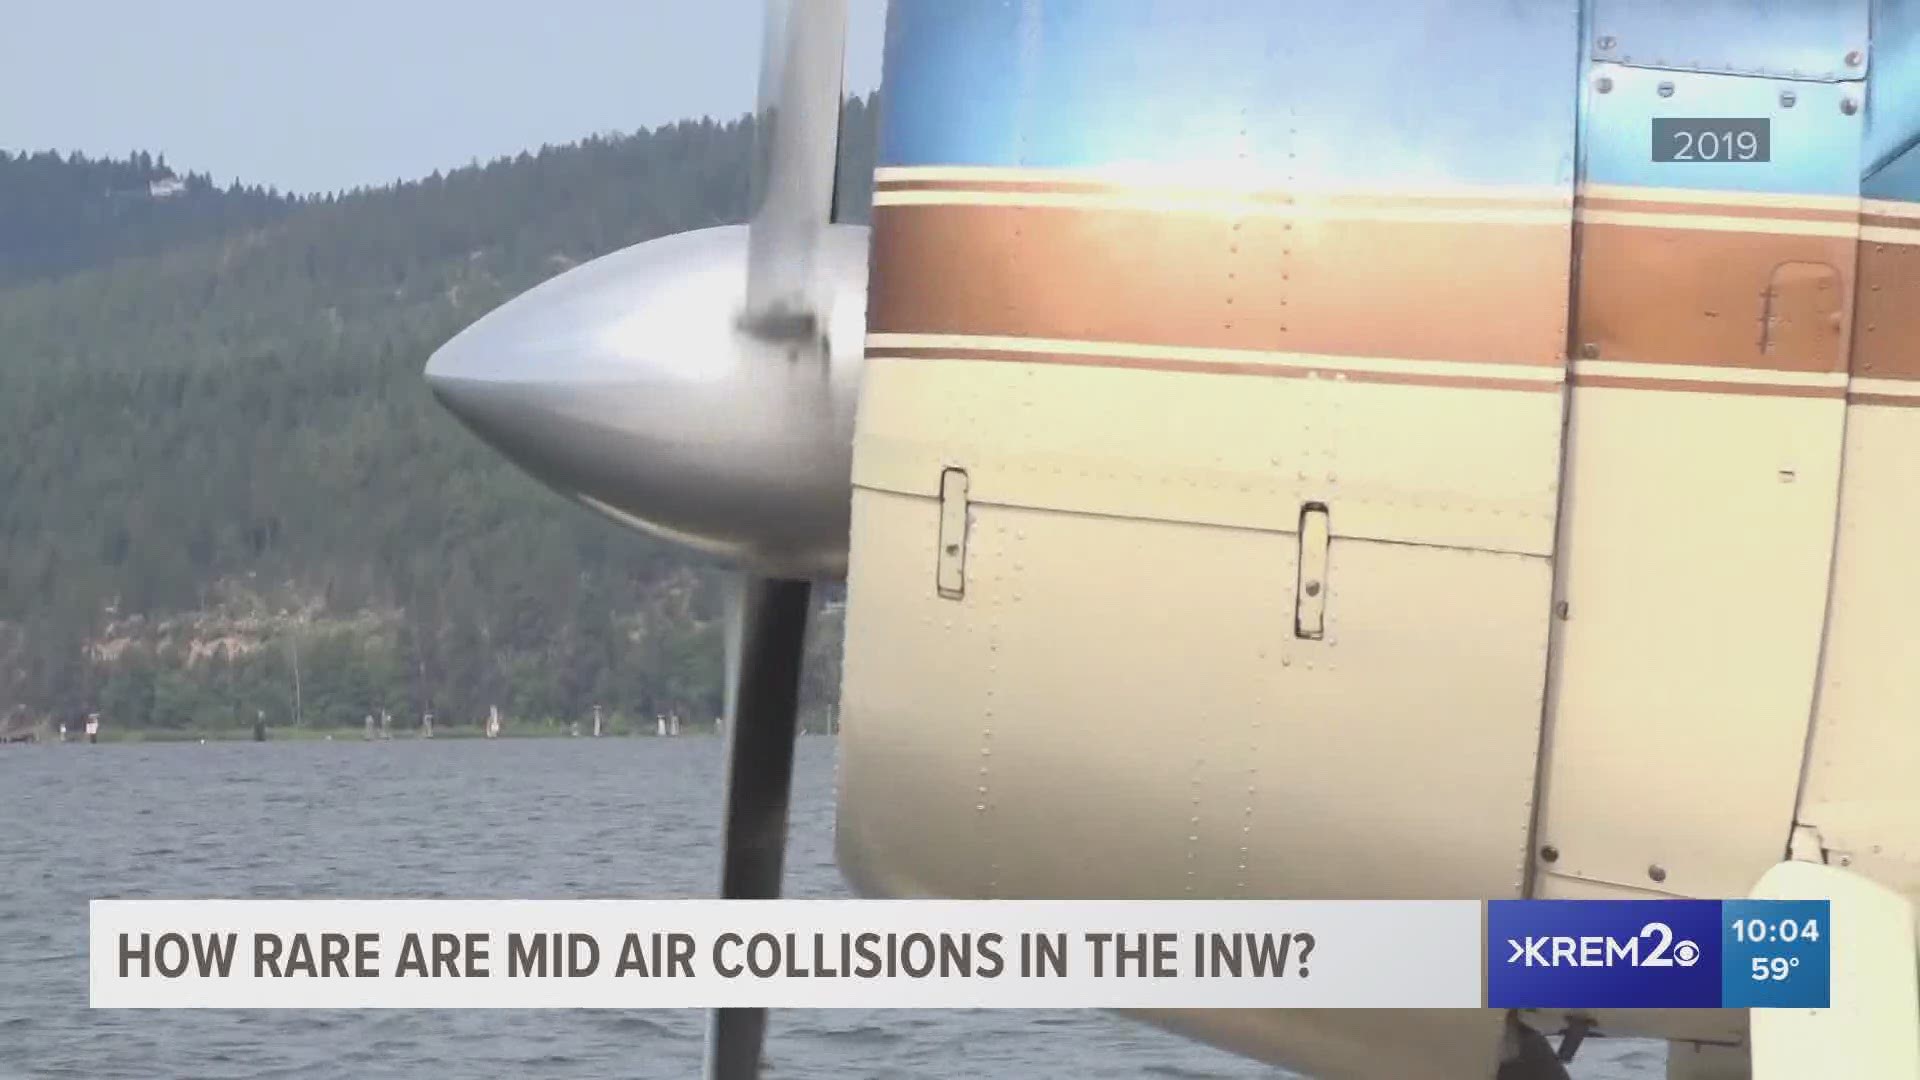 The deadly crash involved 8 people over Lake Coeur d'Alene.